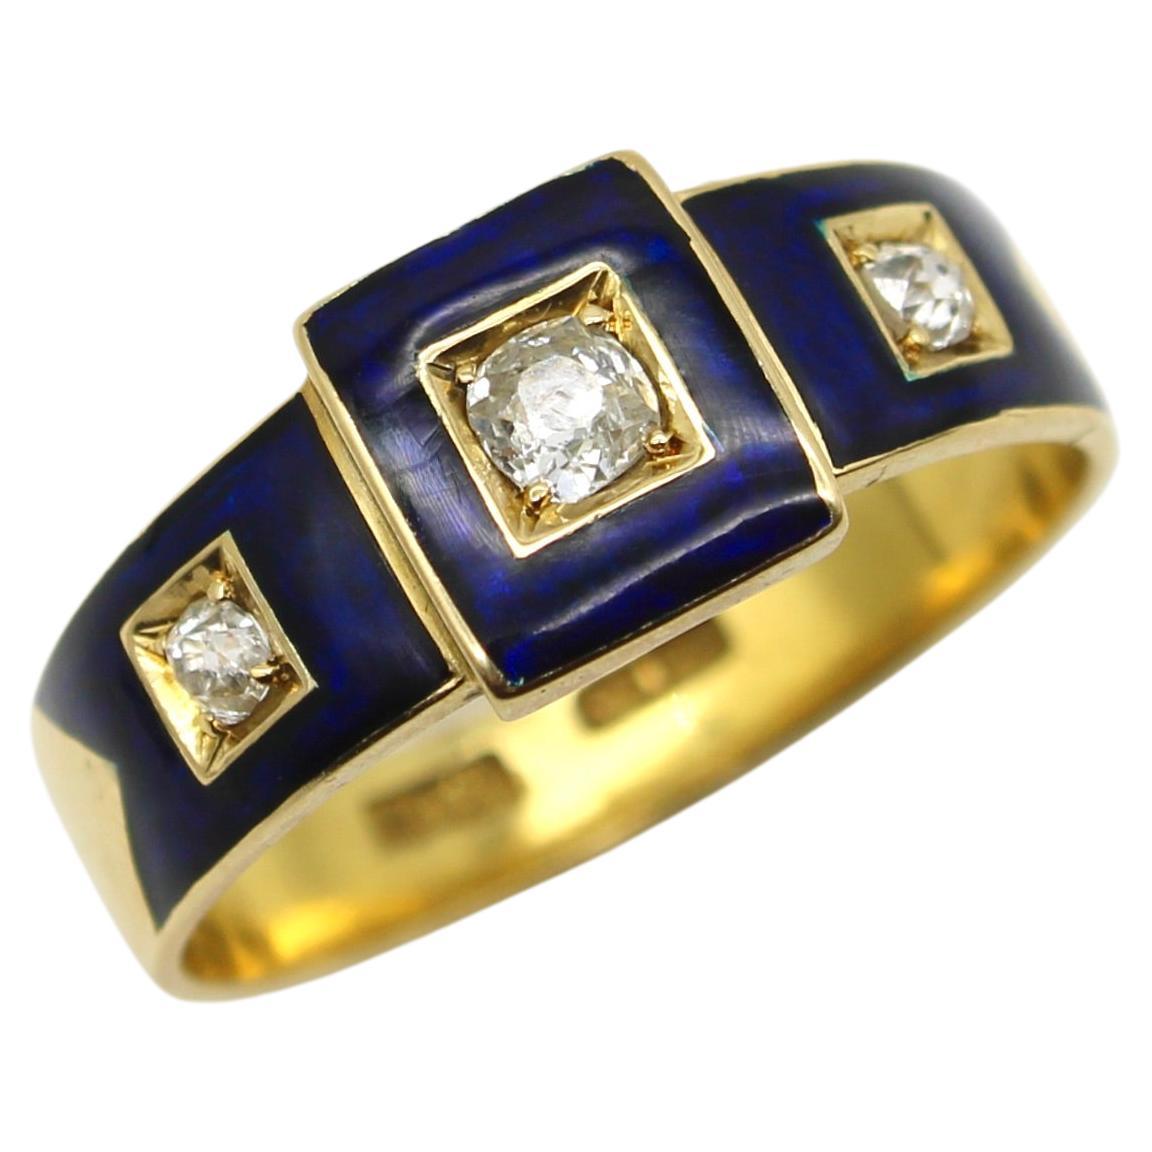 18K Gold Early Victorian Diamond Trilogy Ring with Blue Enamel Details  For Sale